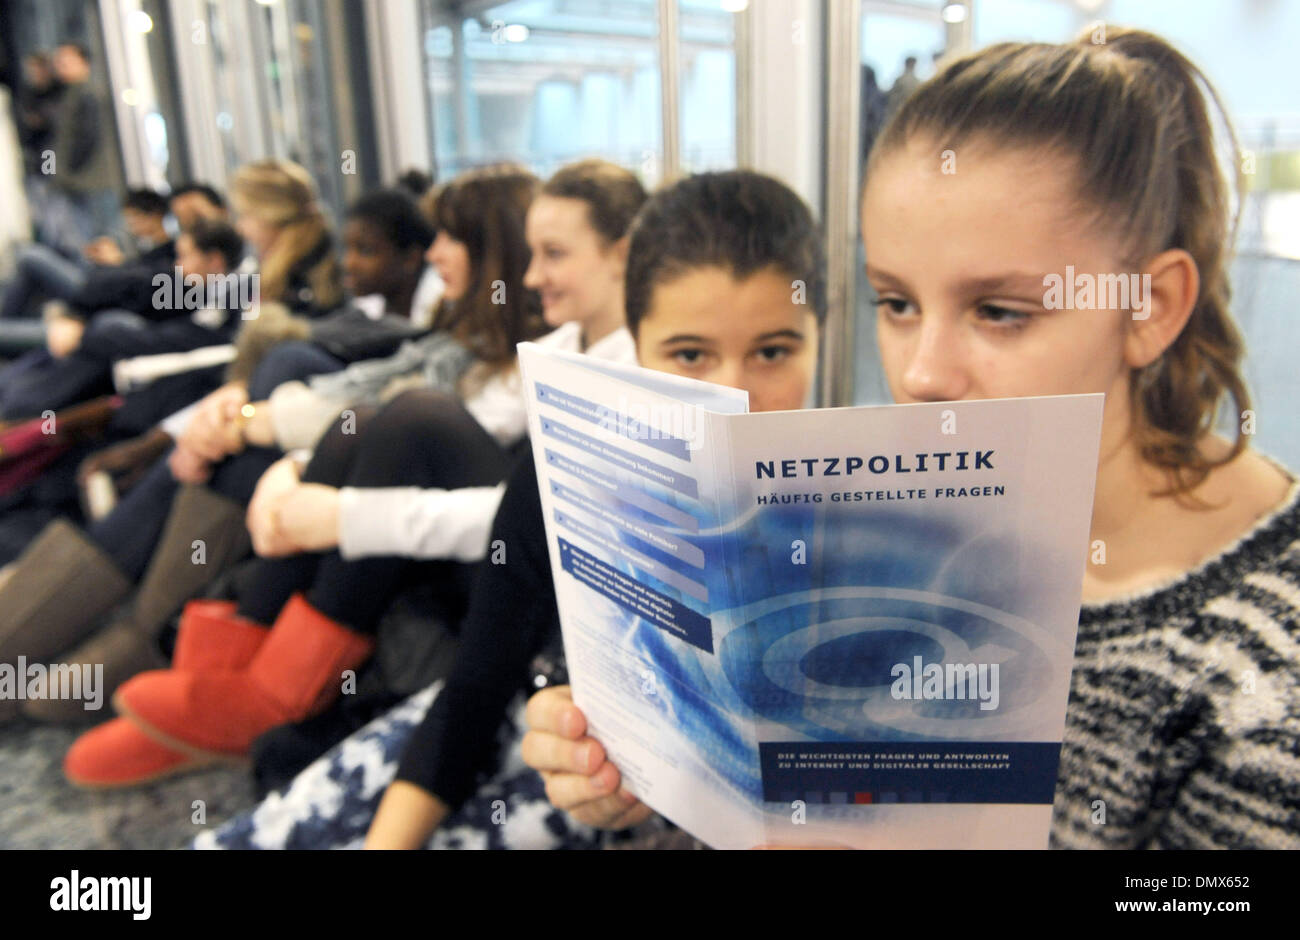 Bremen, Germany. 17th Dec, 2013. Students inform themselves at the fair 'Abgestuerzt? Sicherheit im Netz' (lit: Crashed? Security in the net) about internet security in Bremen, Germany, 17 December 2013. The fair aims to inform school students about the dangers of the internet. Photo: Ingo Wagner/dpa/Alamy Live News Stock Photo